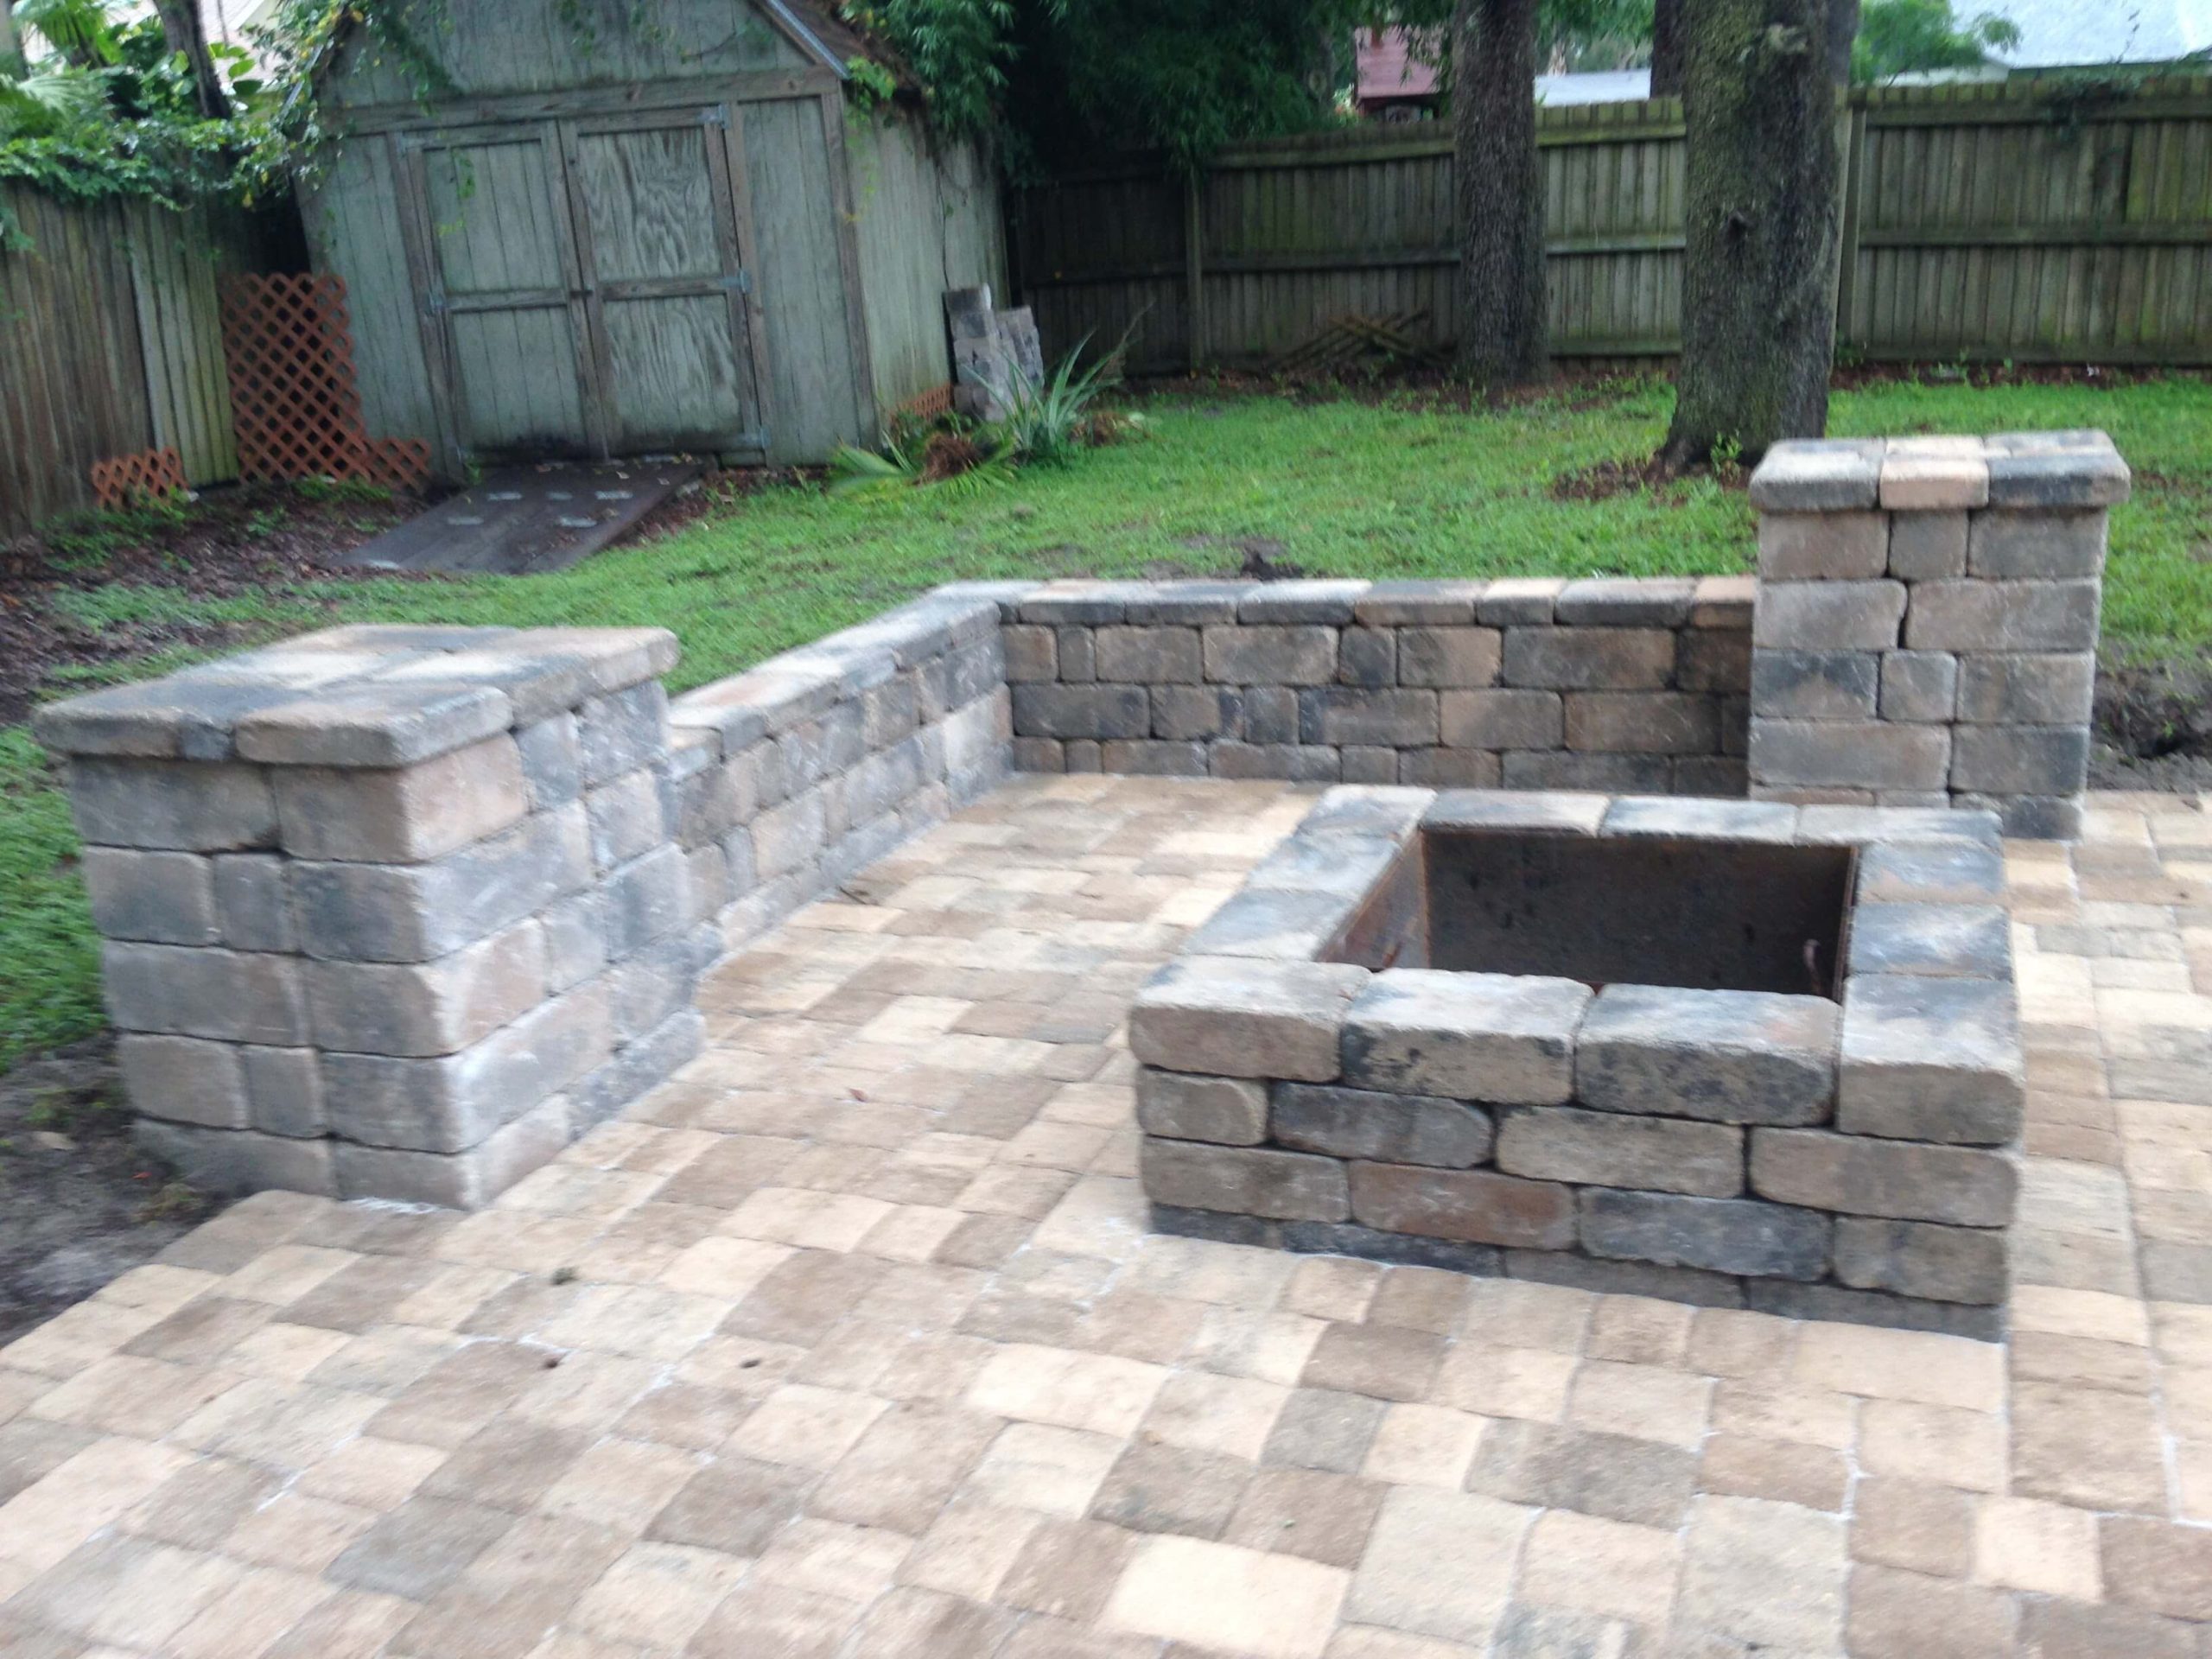 Fire Pits Bay Brick Pavers, How To Build A Fire Pit On Patio Pavers